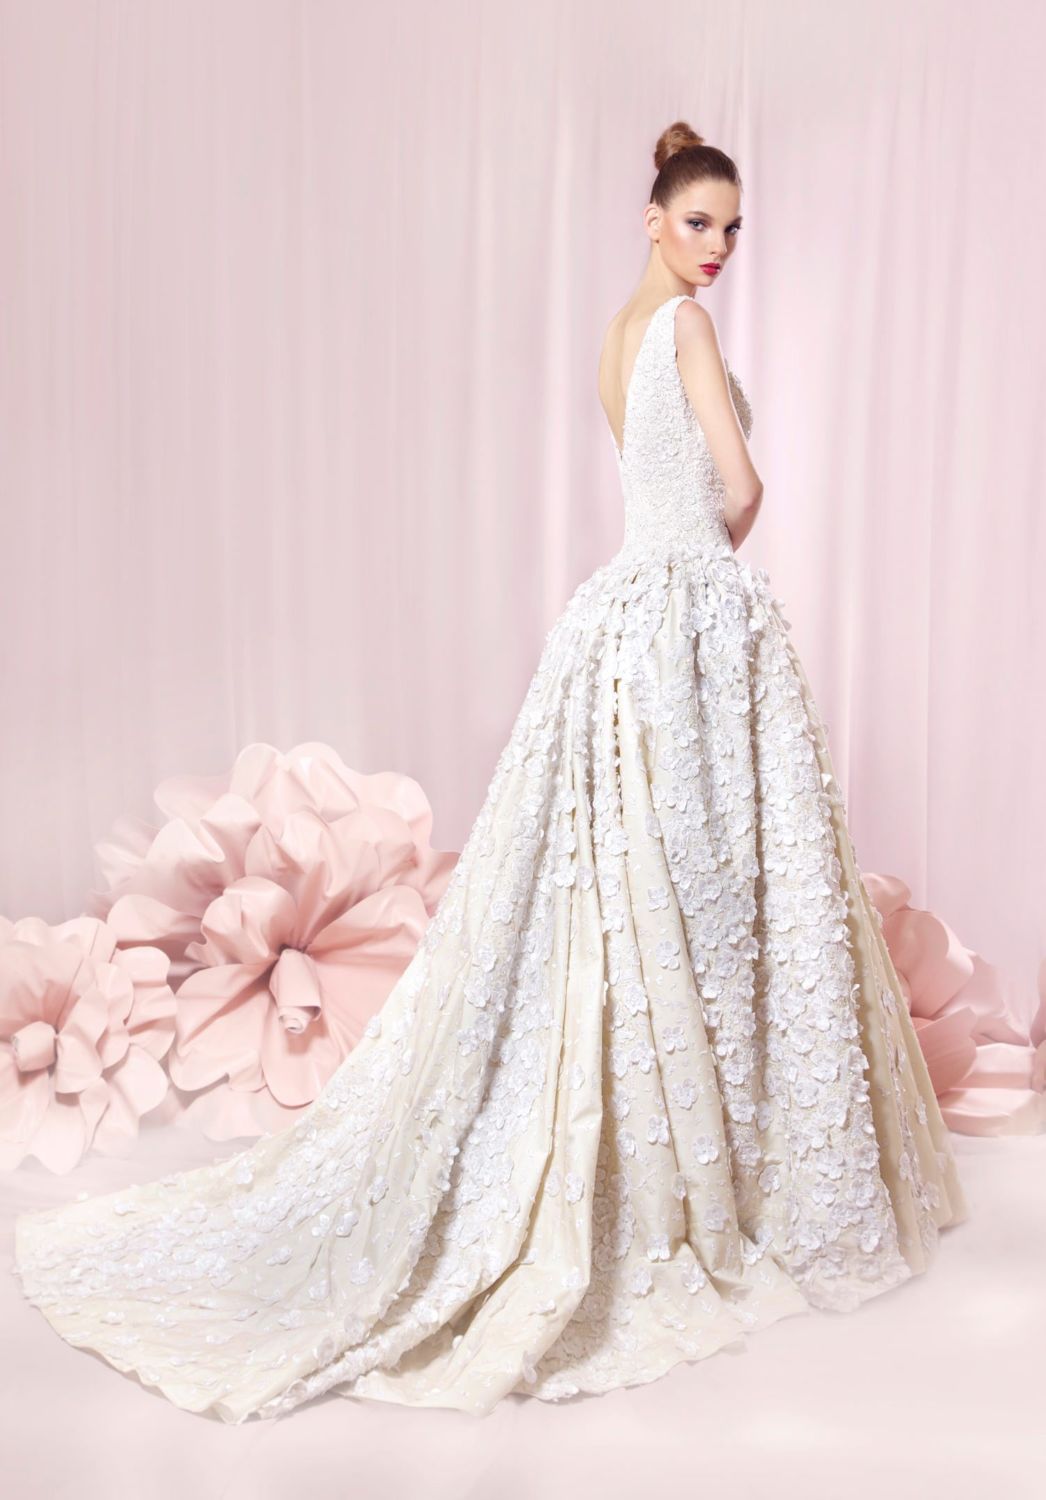 10 Couture Tarek Sinno Gowns You'll Dream of Wearing ...